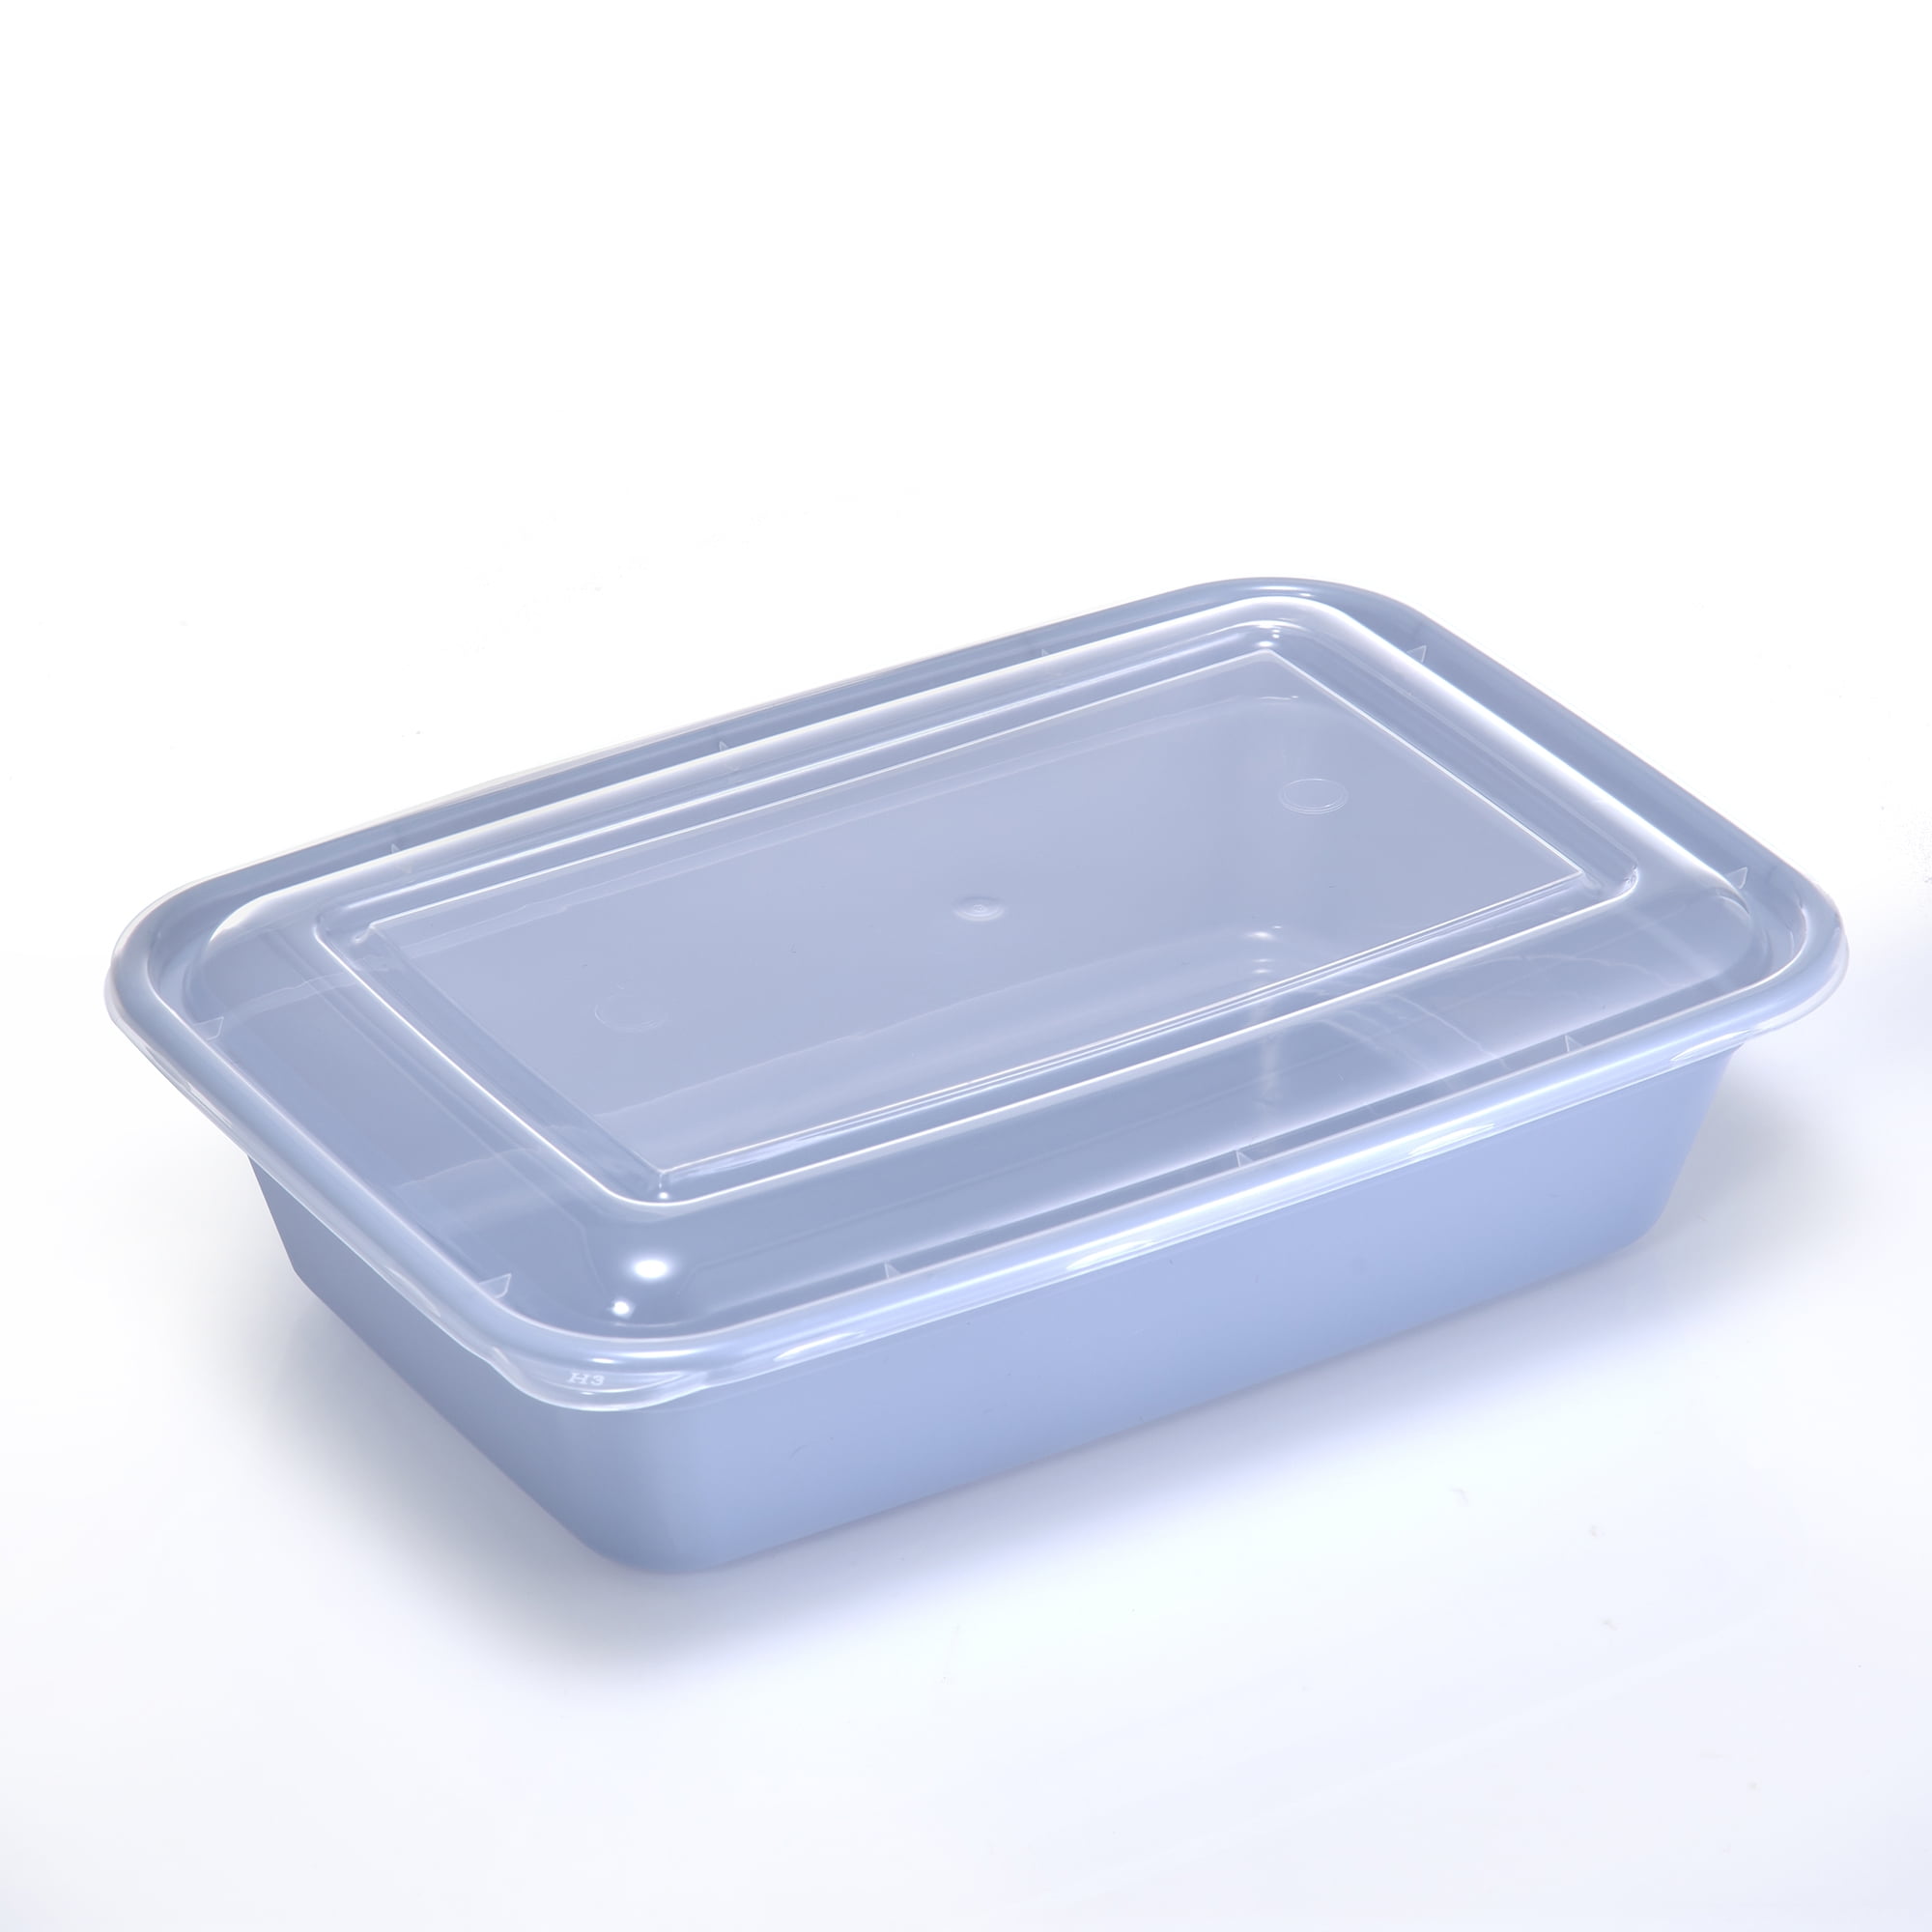 NEW Mainstays 2 Sections Meal Prep Food Storage Containers 5 Pk 10 pc